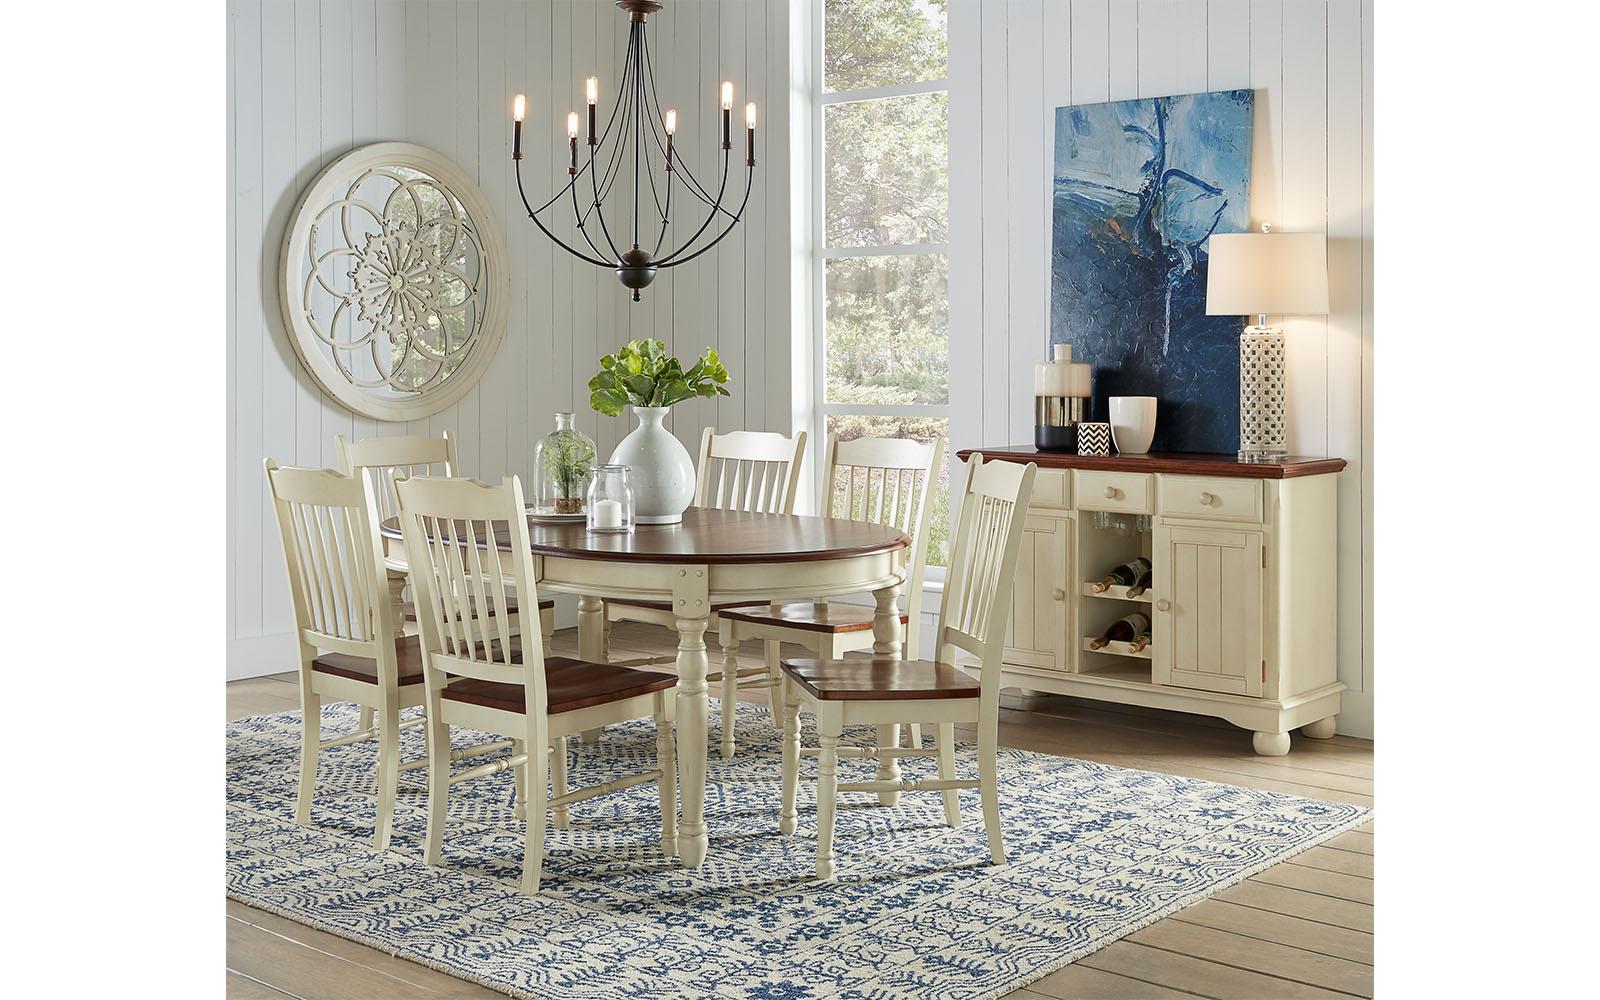 Rustic Dining Table Set British Isles CO BRICO6310-BRICO267K-Set-7 in Cocoa, Off-White 